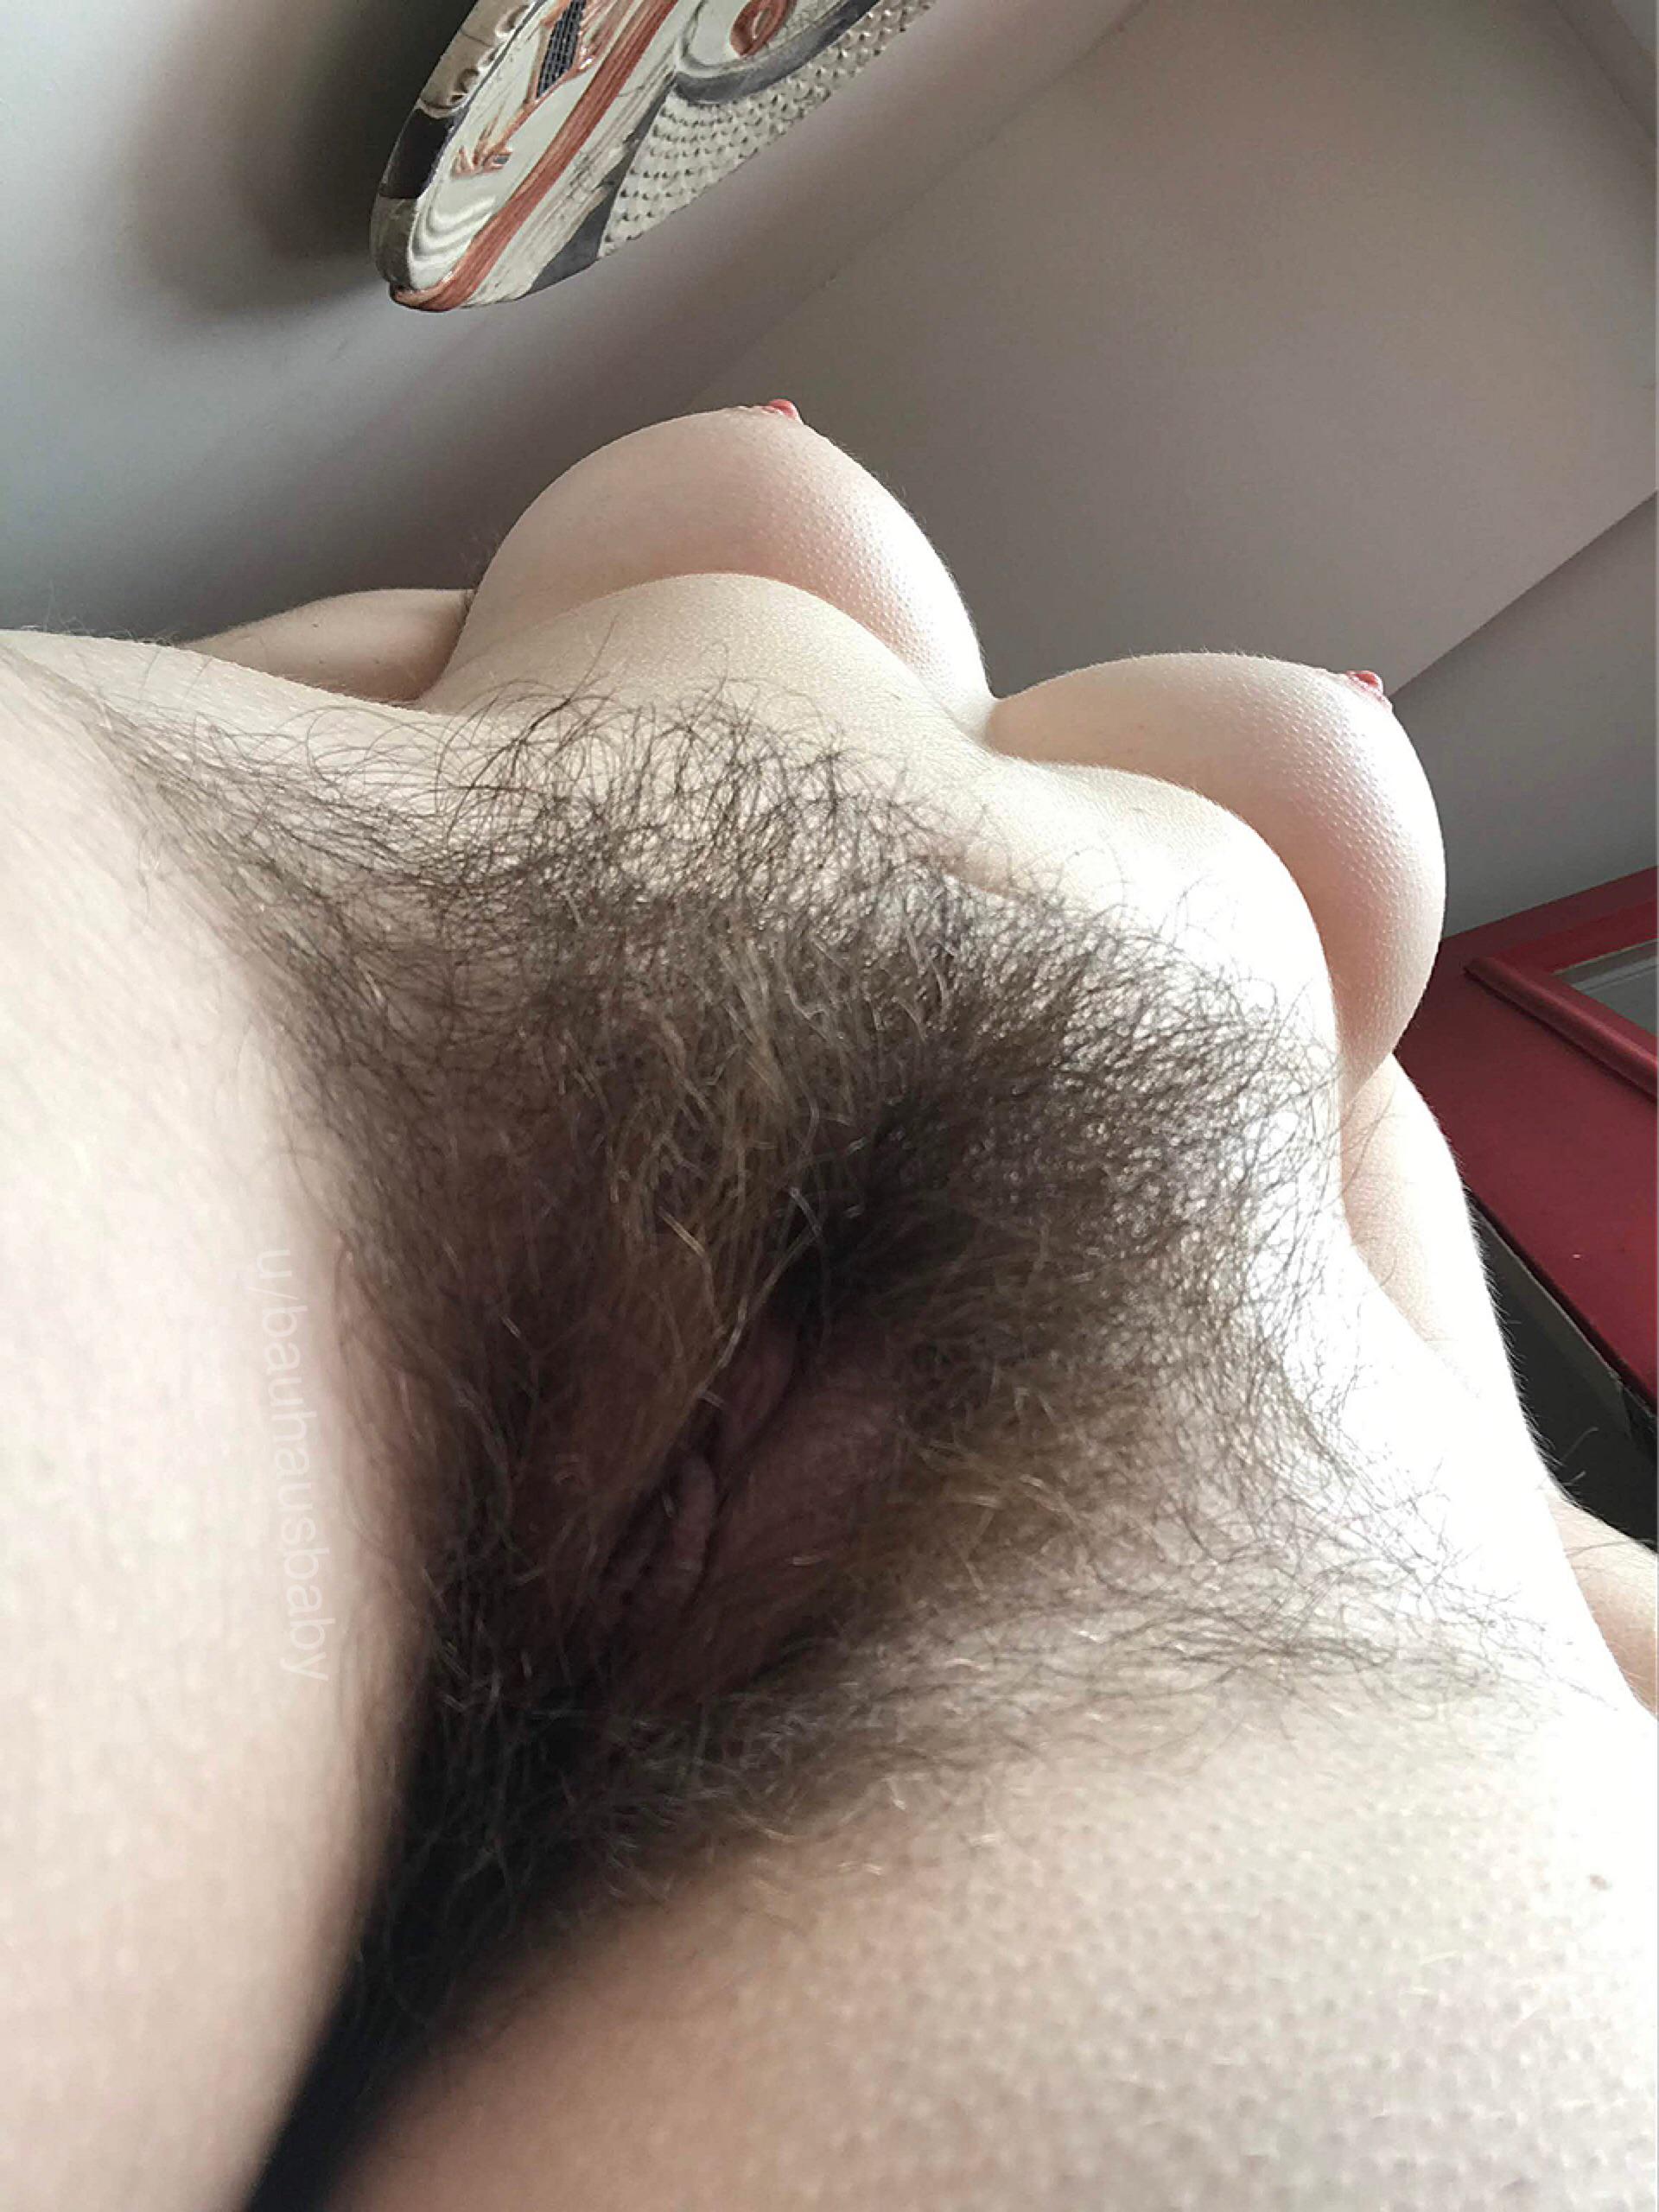 Haired Pov